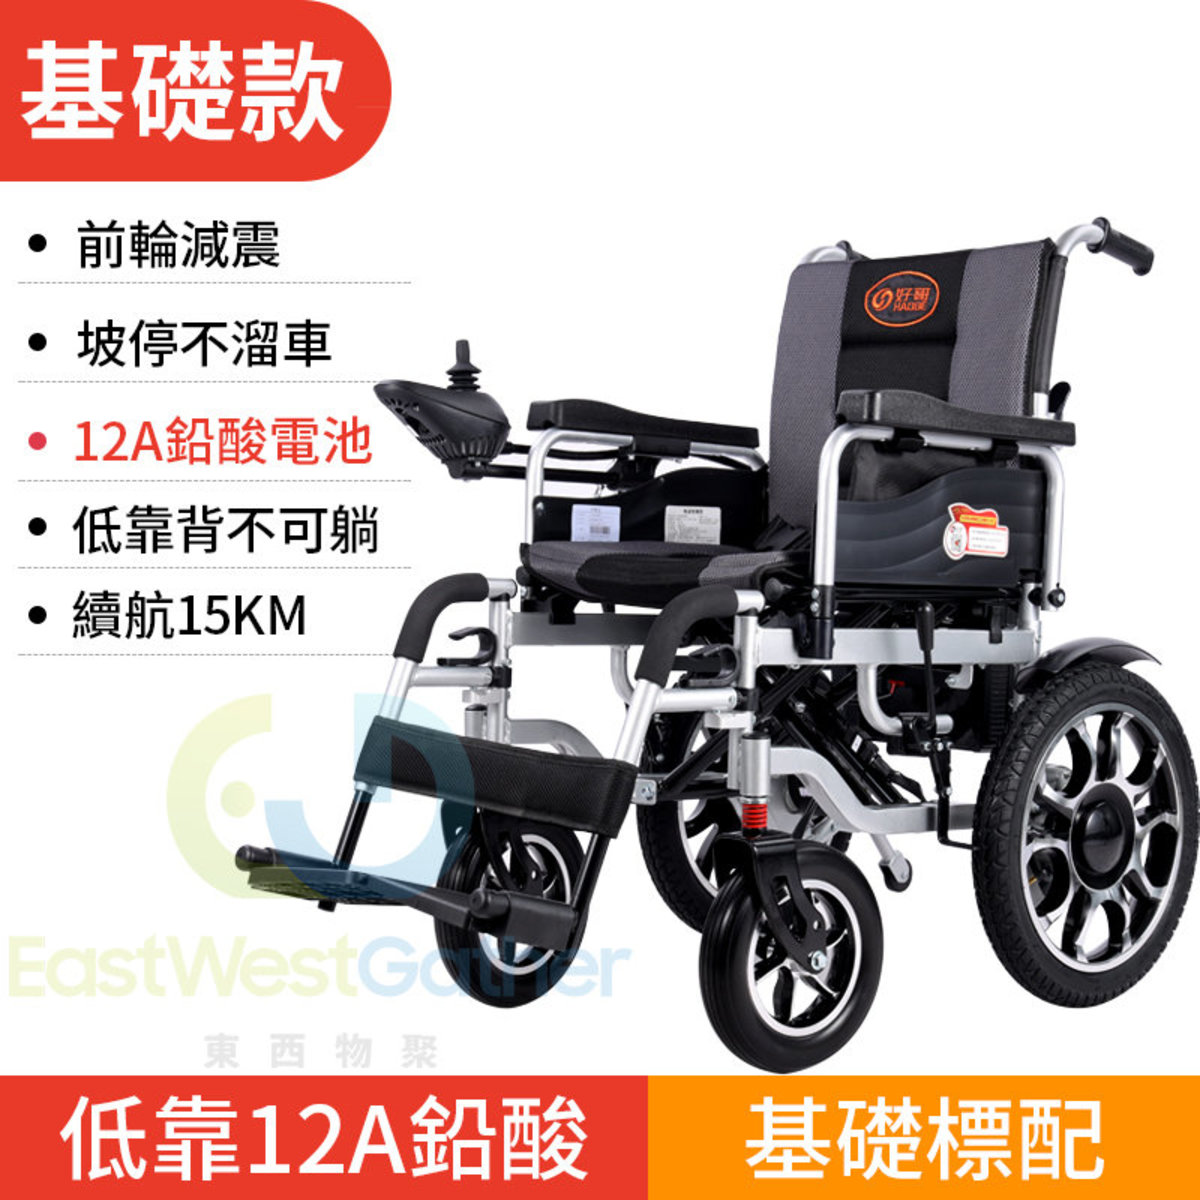 Include installation and delivery basic low back / front wheel shock absorption 12A lead acid battery [about 15km] electric wheelchair